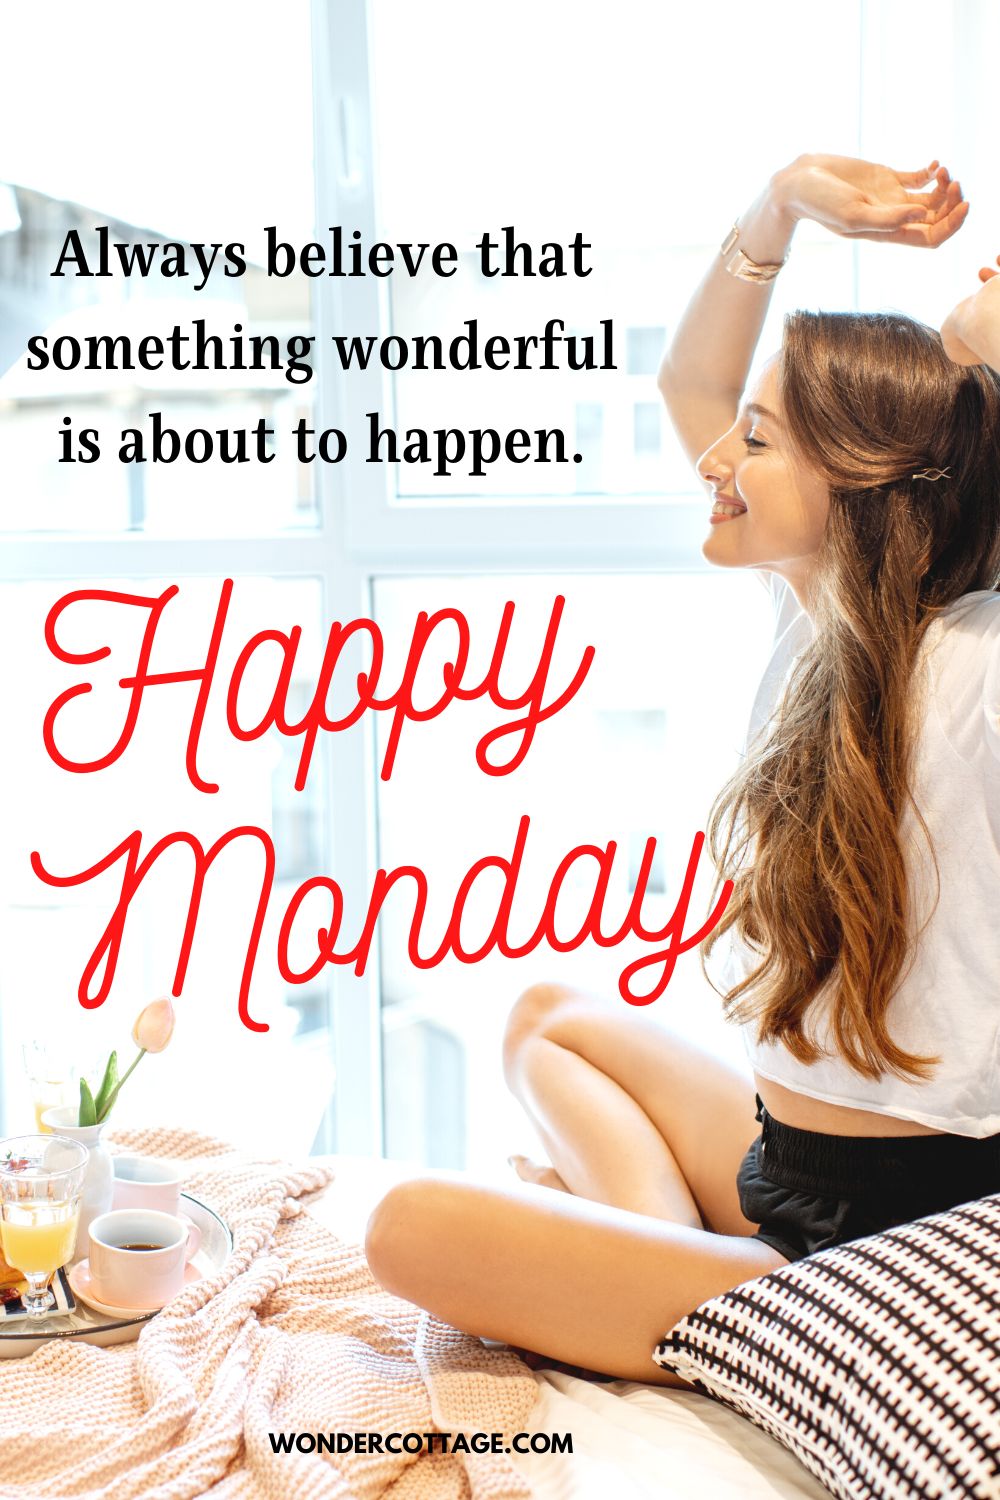 Always believe that something wonderful is about to happen. Happy Monday